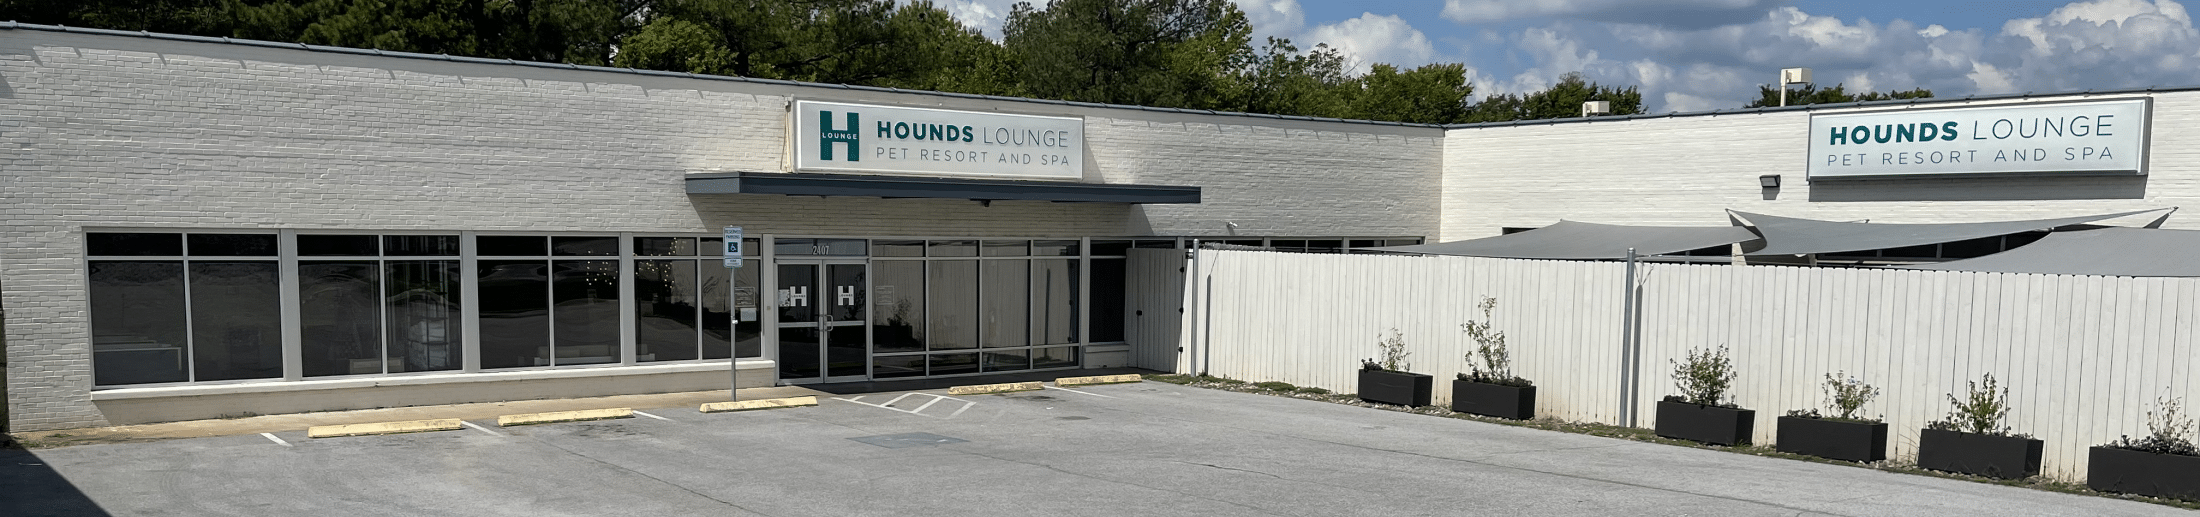 Hounds Lounge Fayetteville